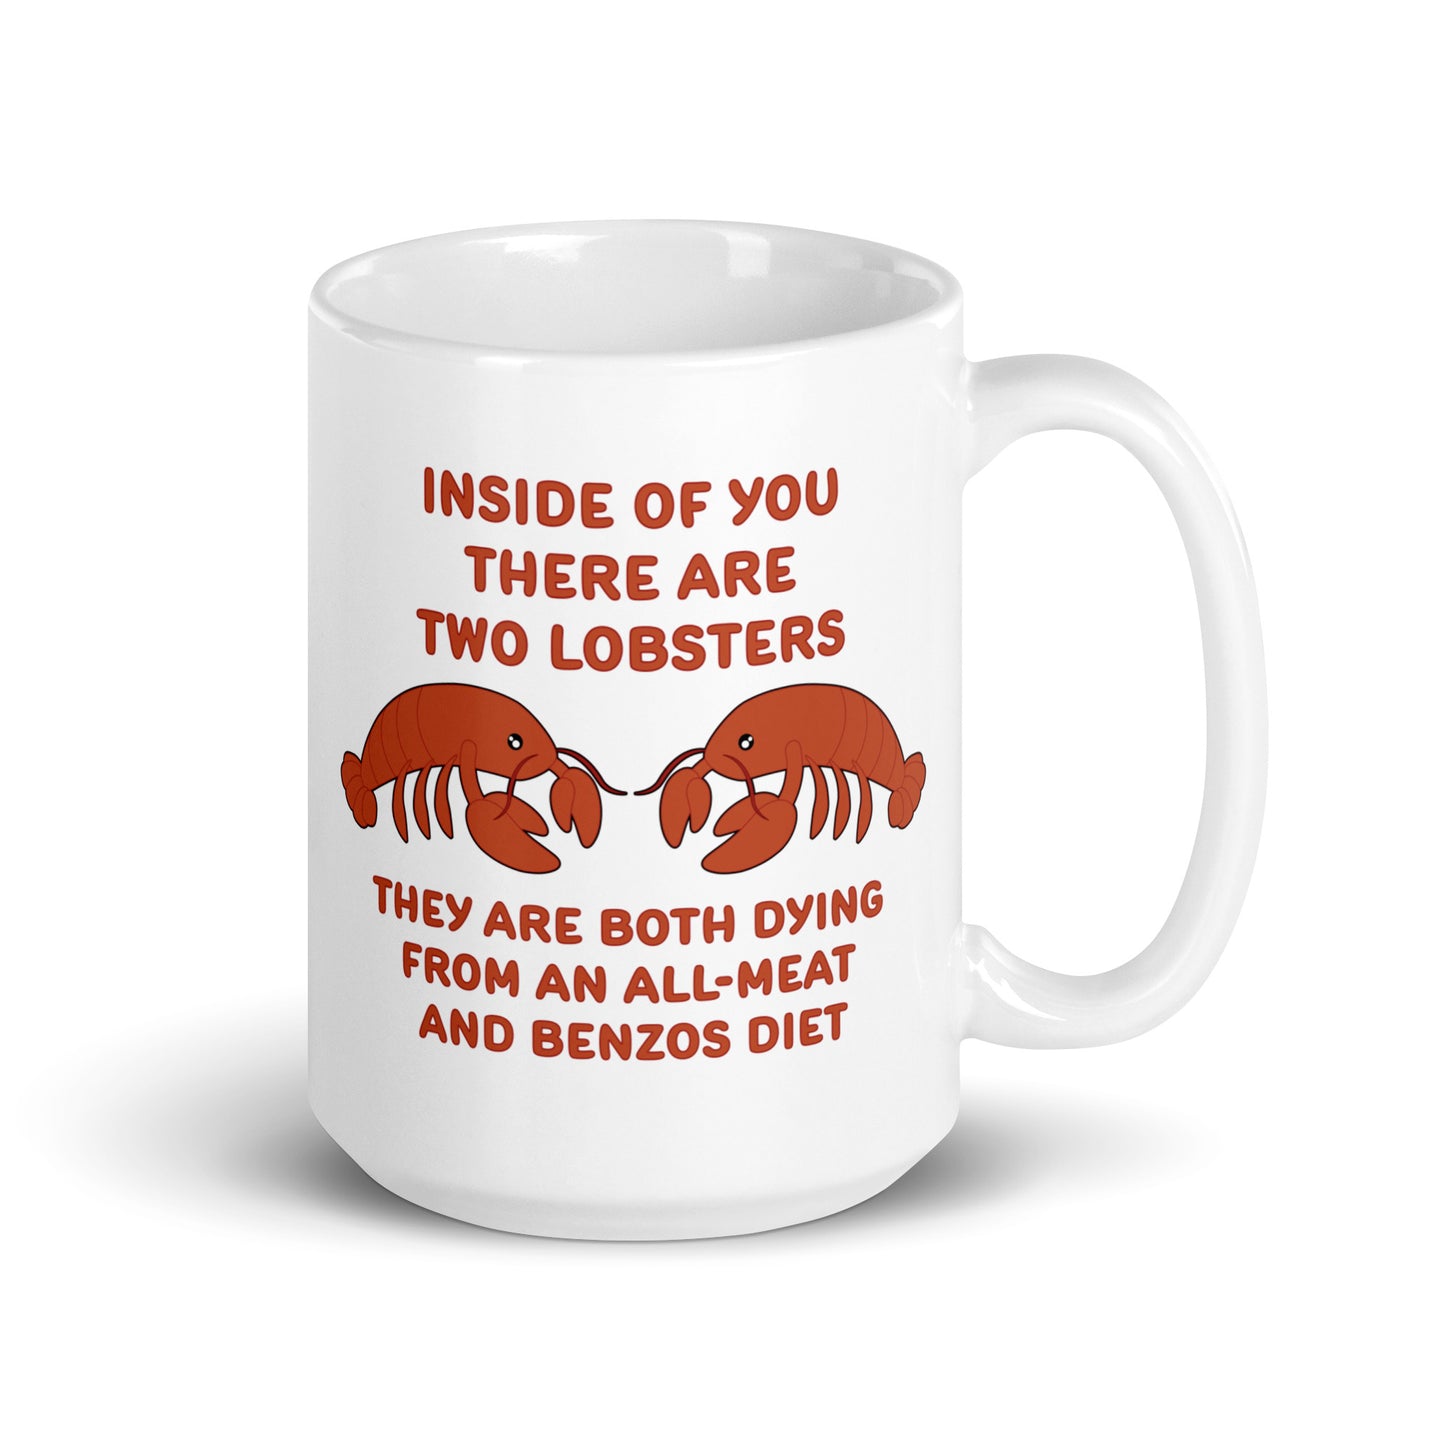 A white 15 ounce ceramic mug featuring an illustration of two lobsters. Text around the lobsters reads "Inside of you there are two lobsters." "They are both dying from an all-meat and benzos diet."